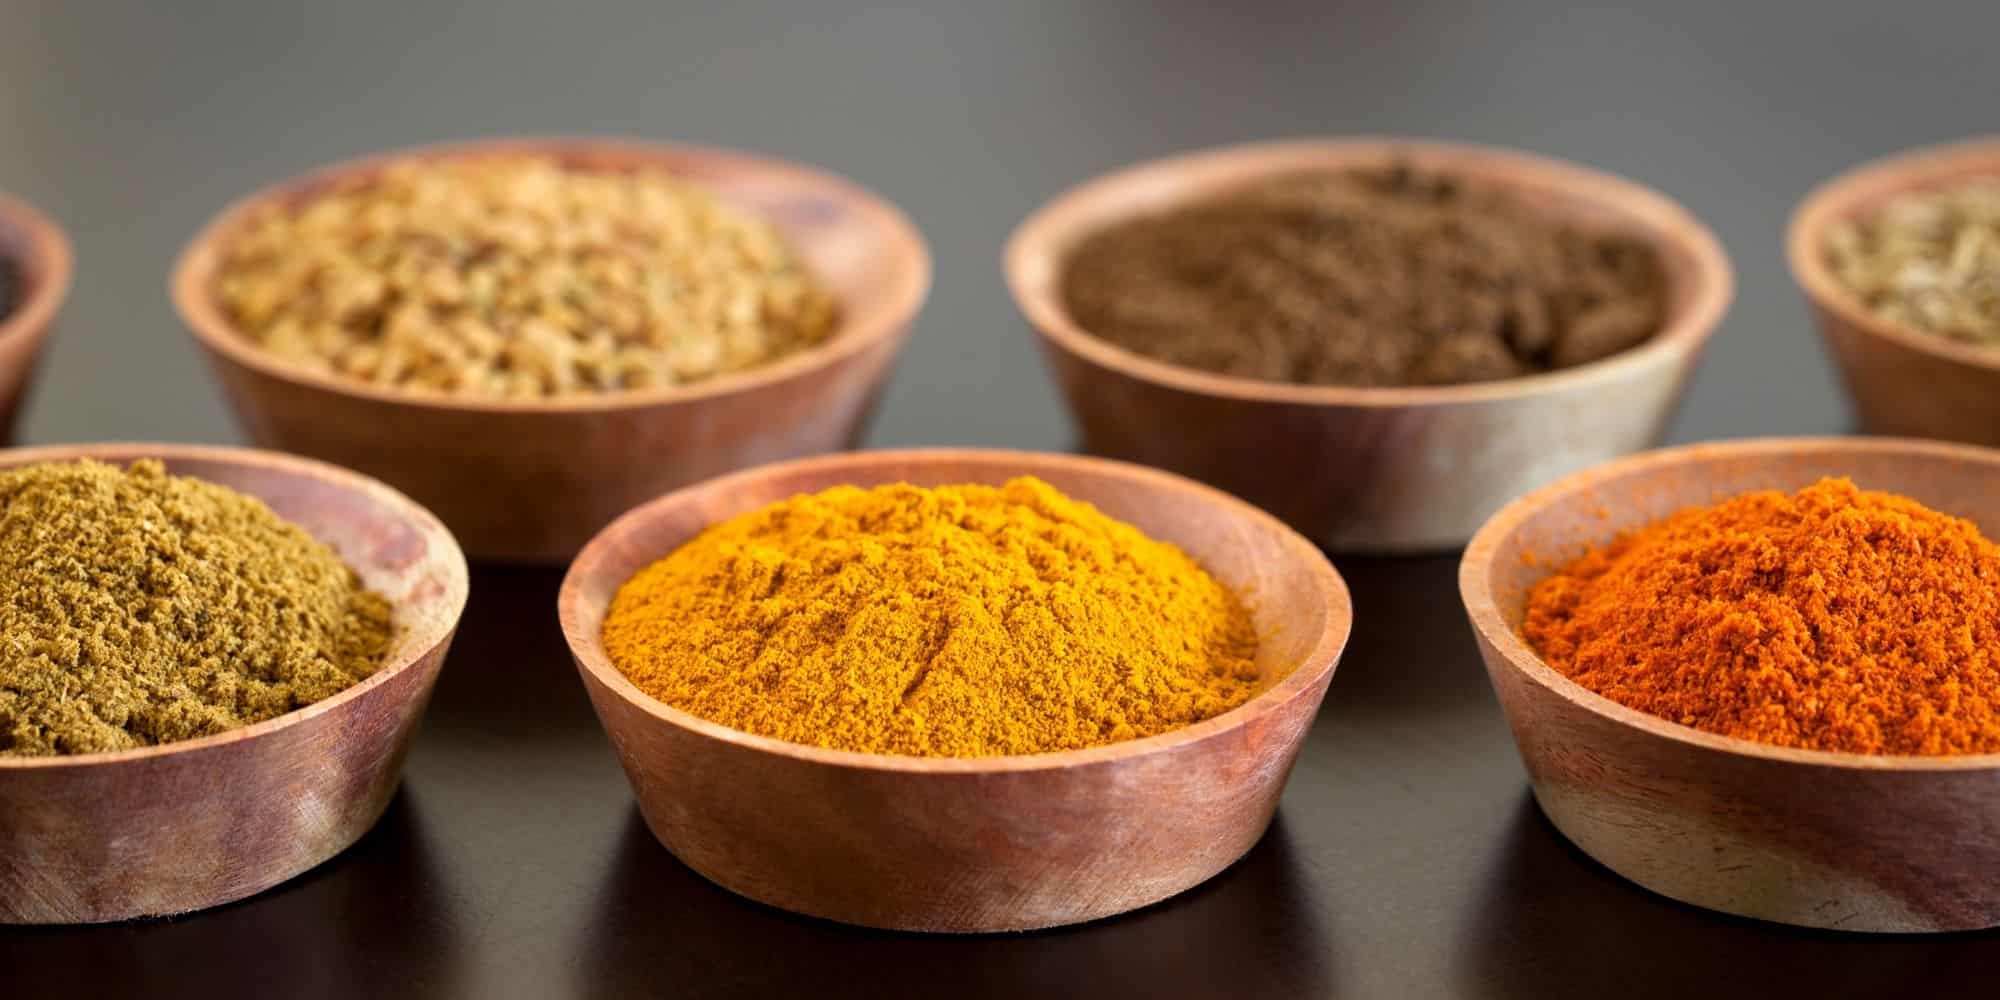 How Medicinal Spices Can Help with Inflammation, Digestion, and More